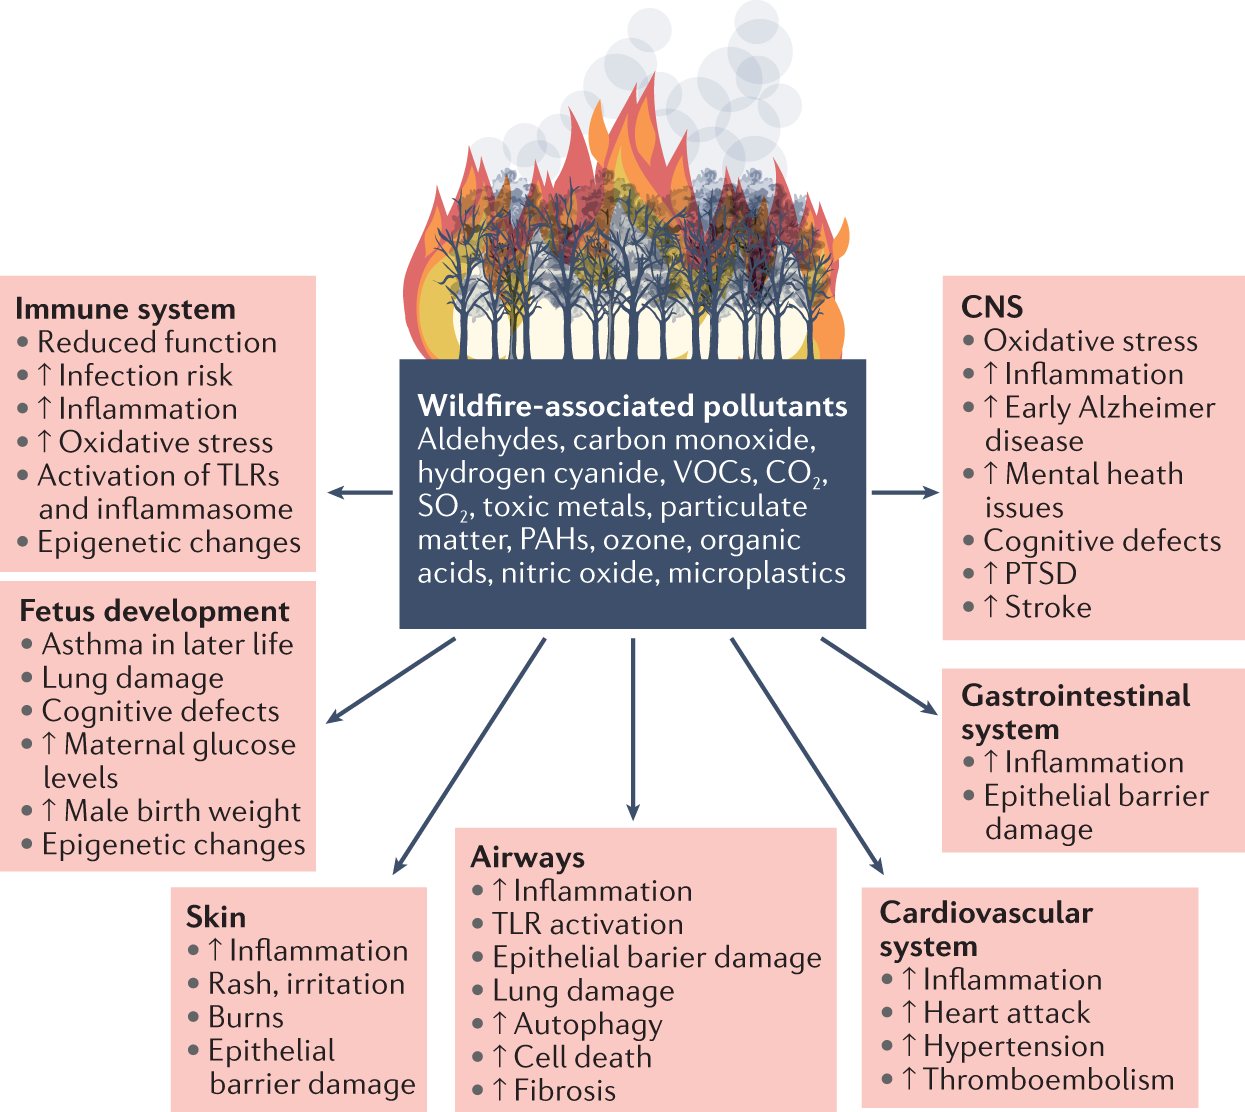 Human and planetary health on fire